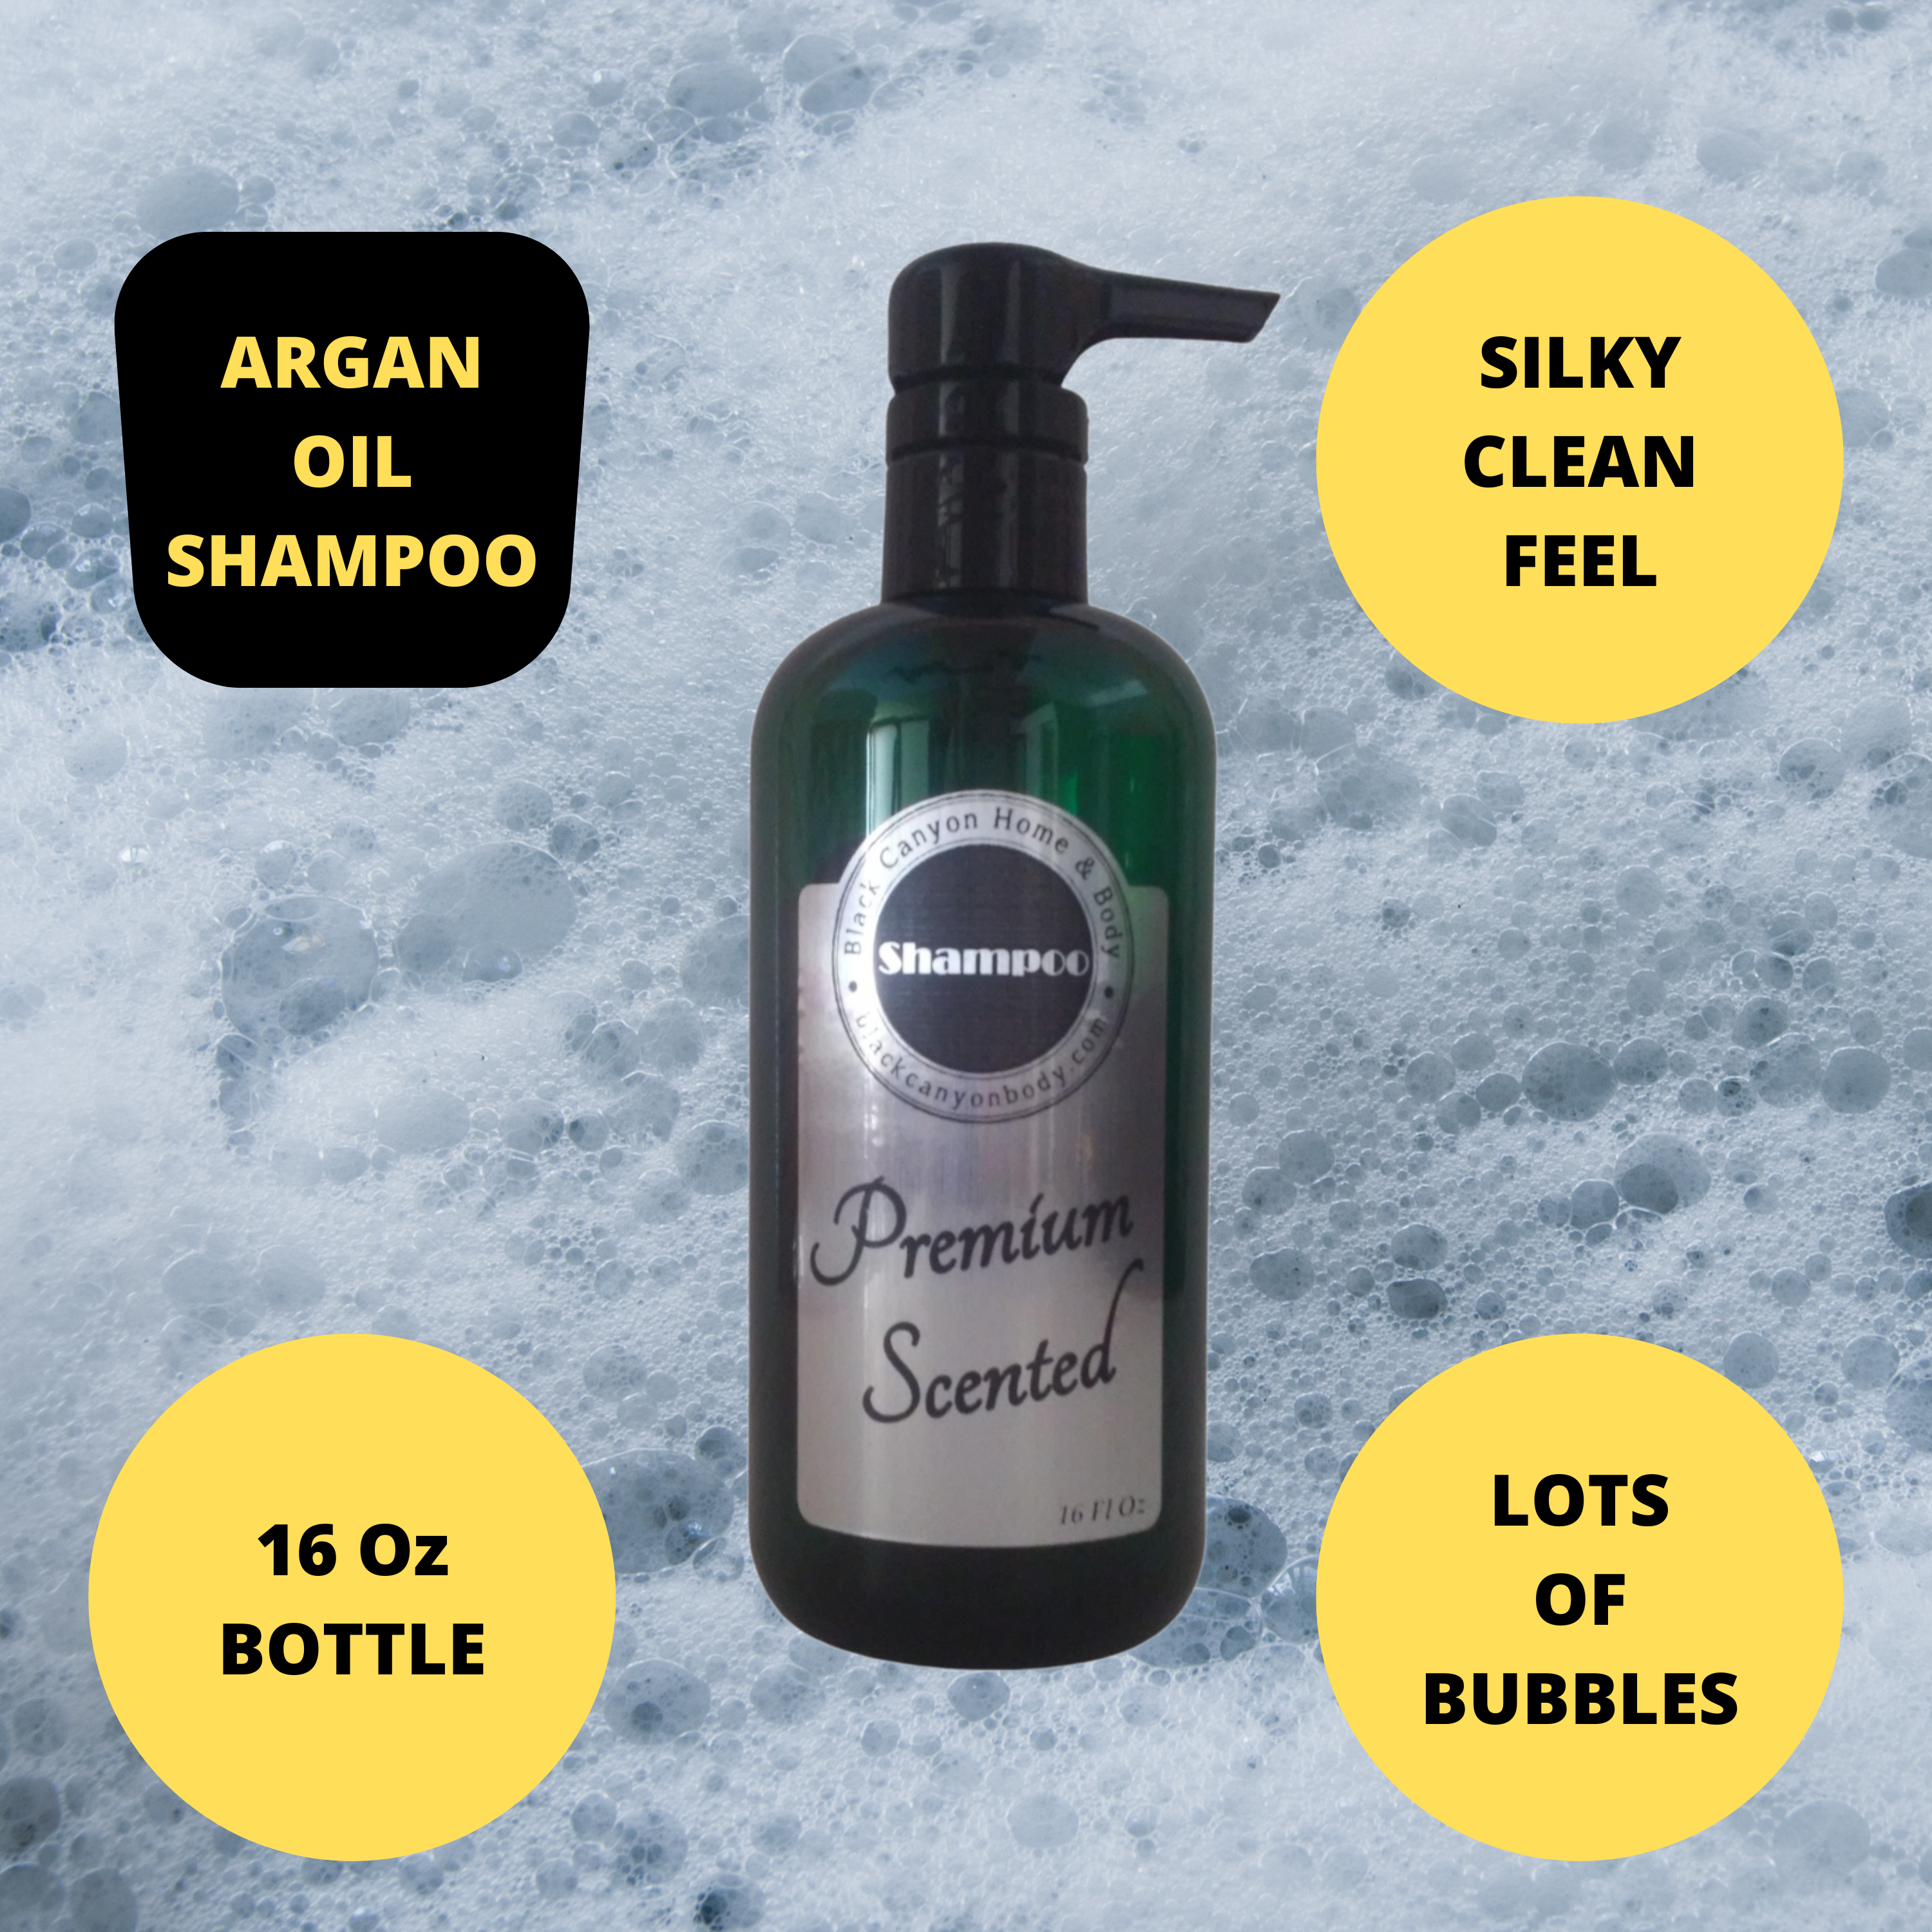 Black Canyon Amber Fig Scented Shampoo with Argan Oil